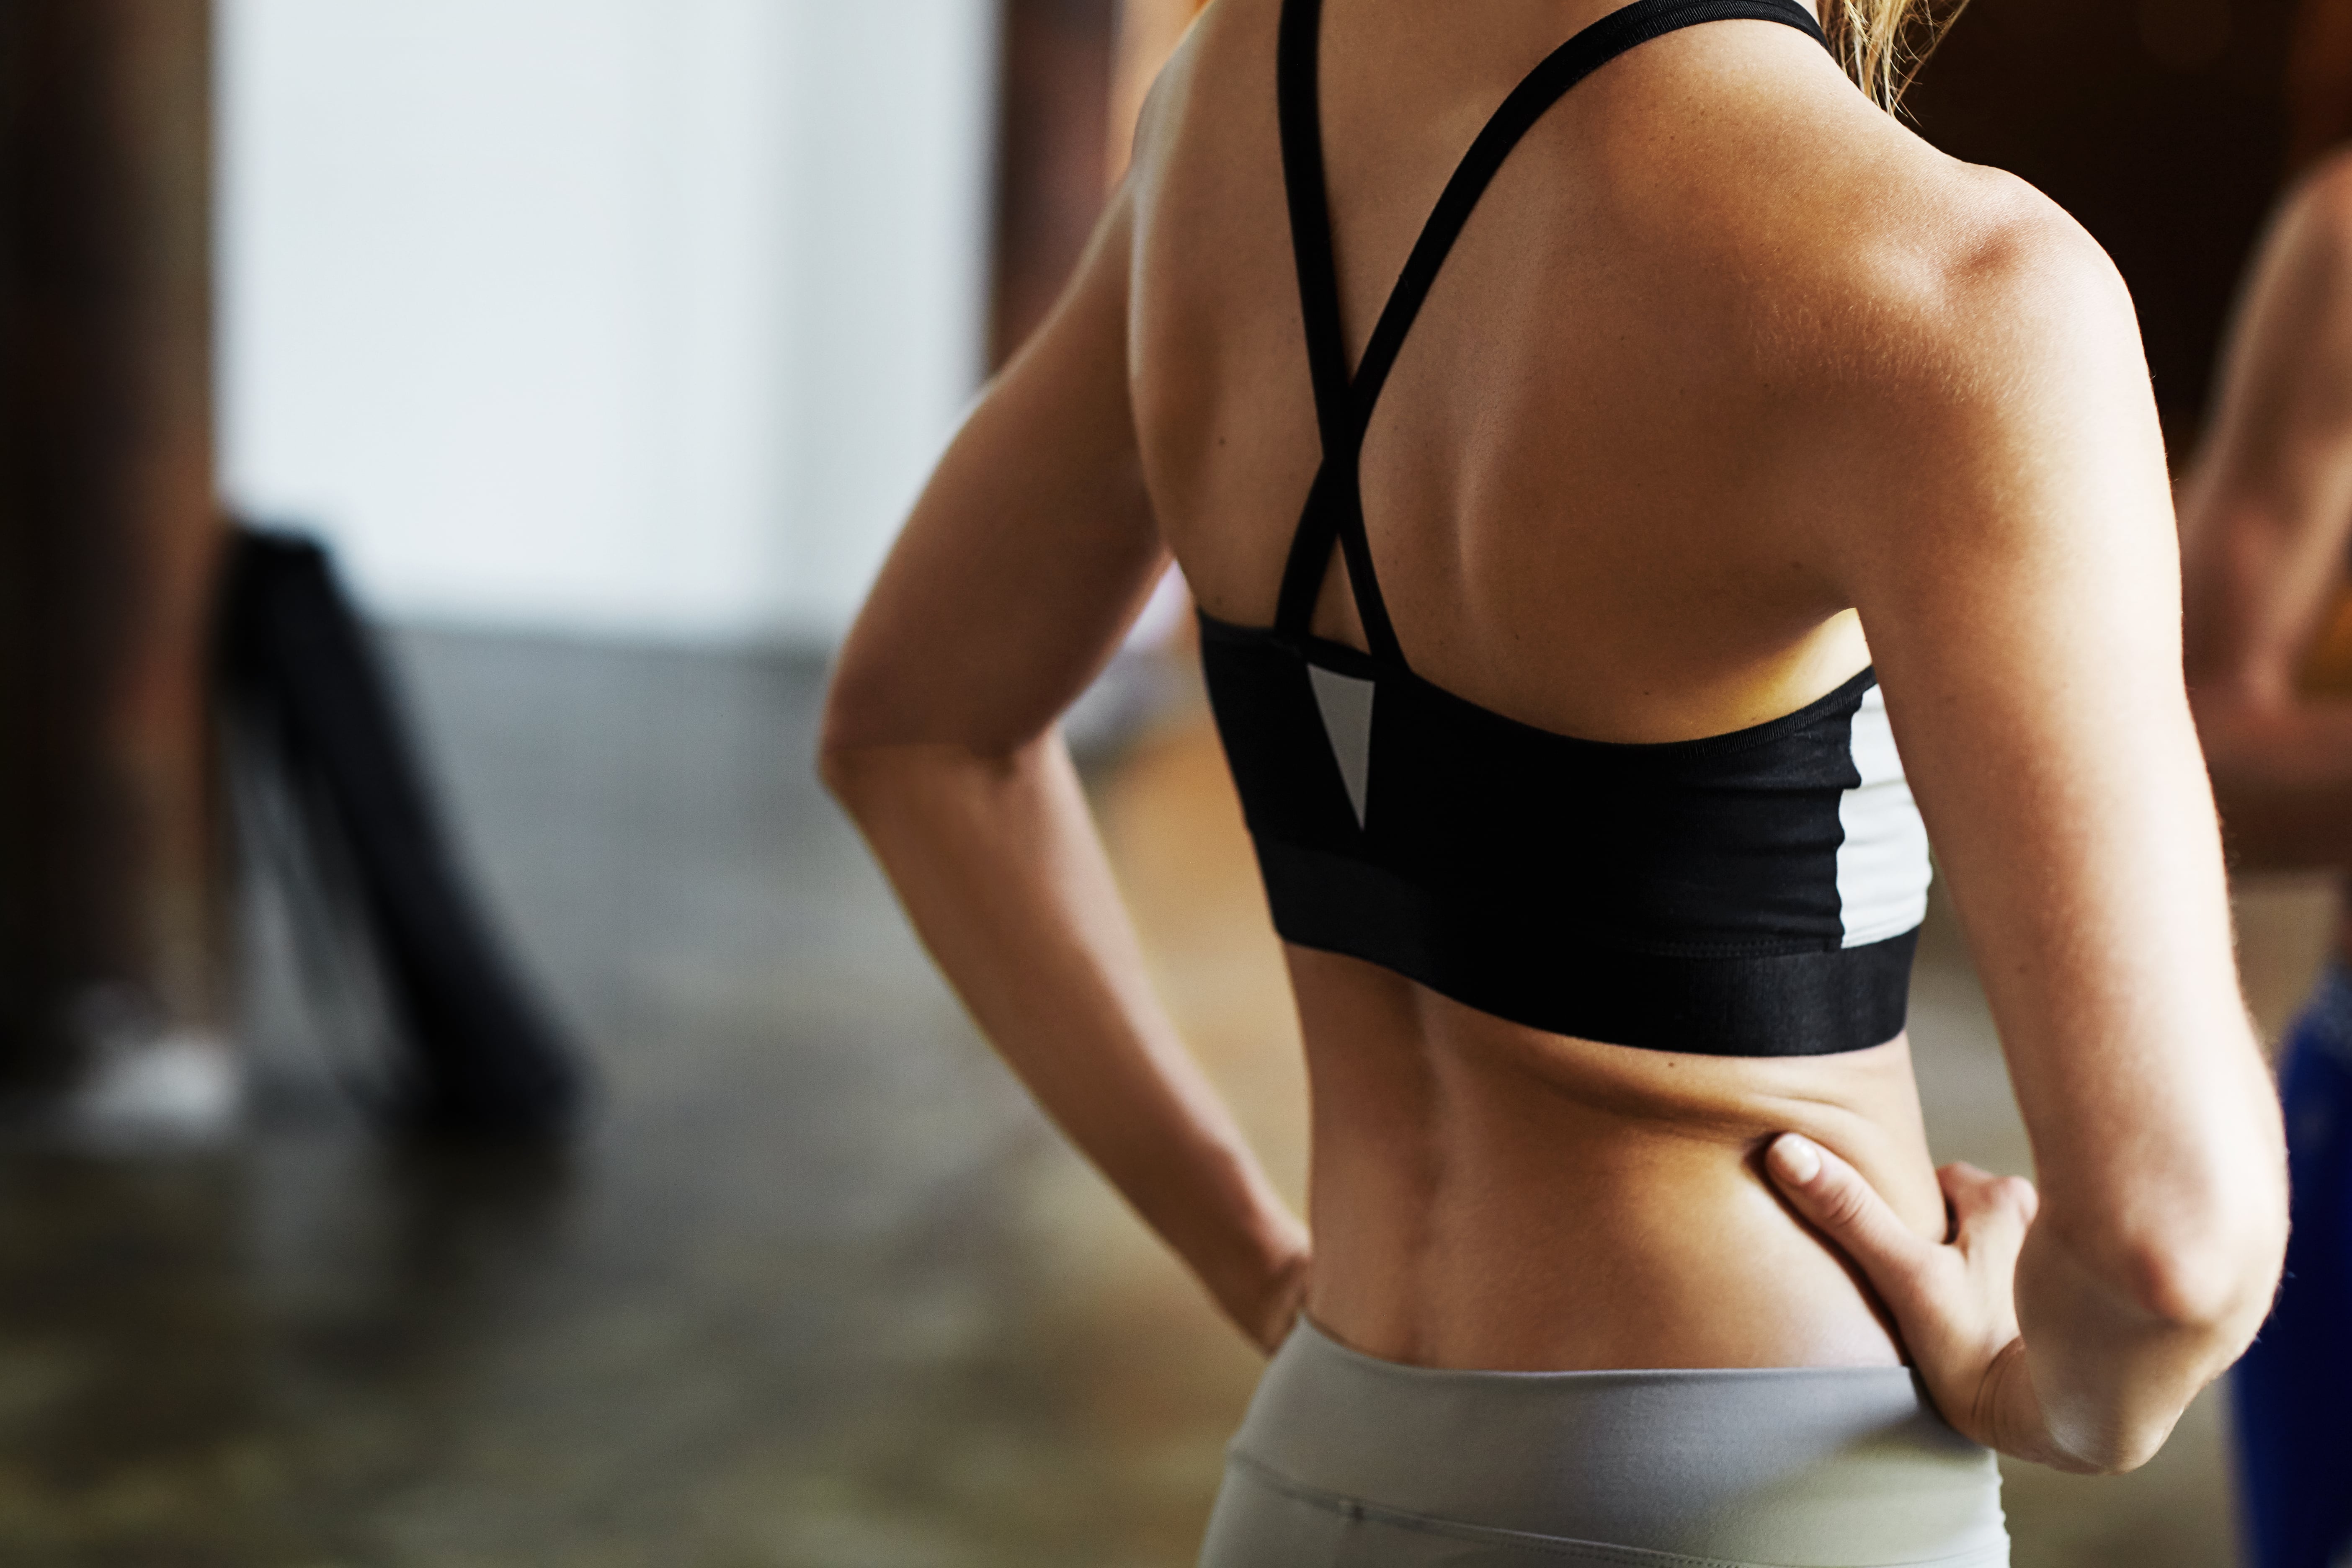 How Long Can You Keep a Sports Bra On?